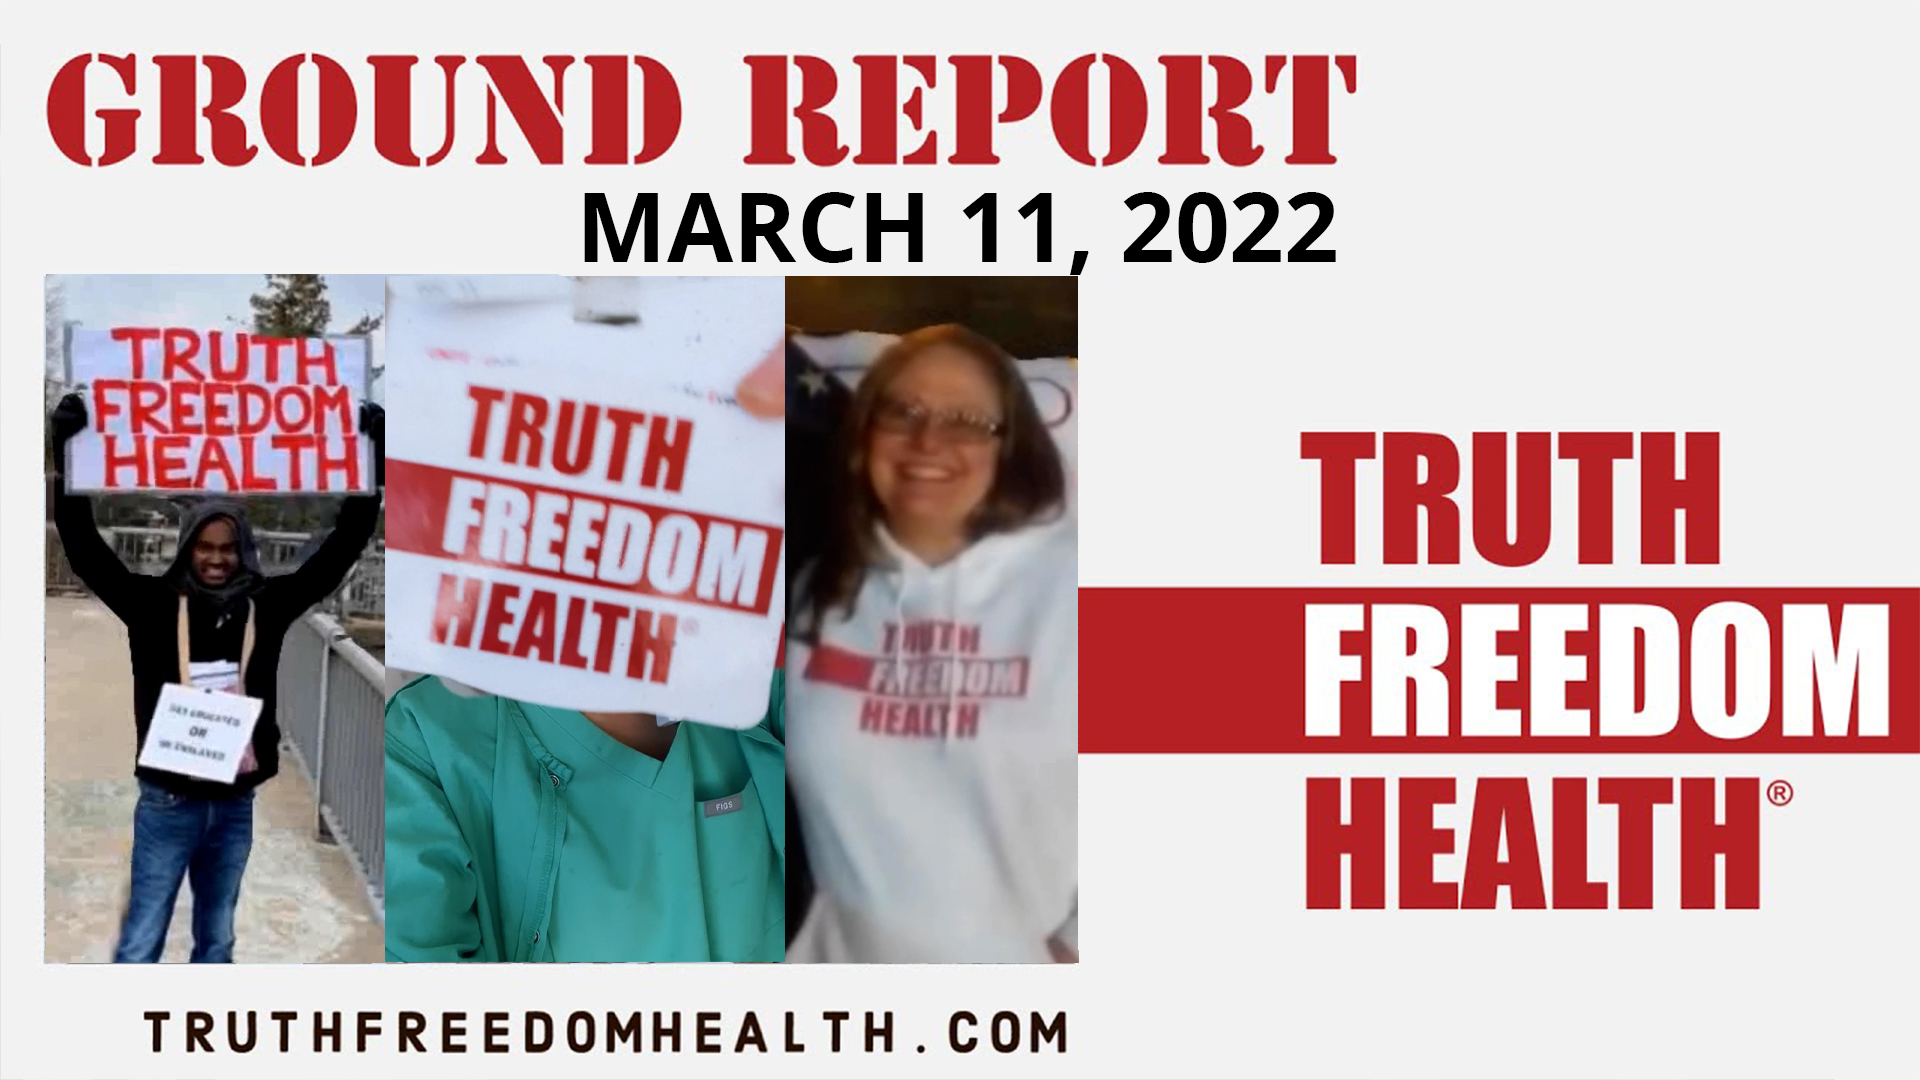 Dr. SHIVA BROADCAST: #TruthFreedomHealth Educators Bringing the Science of Systems on the Ground